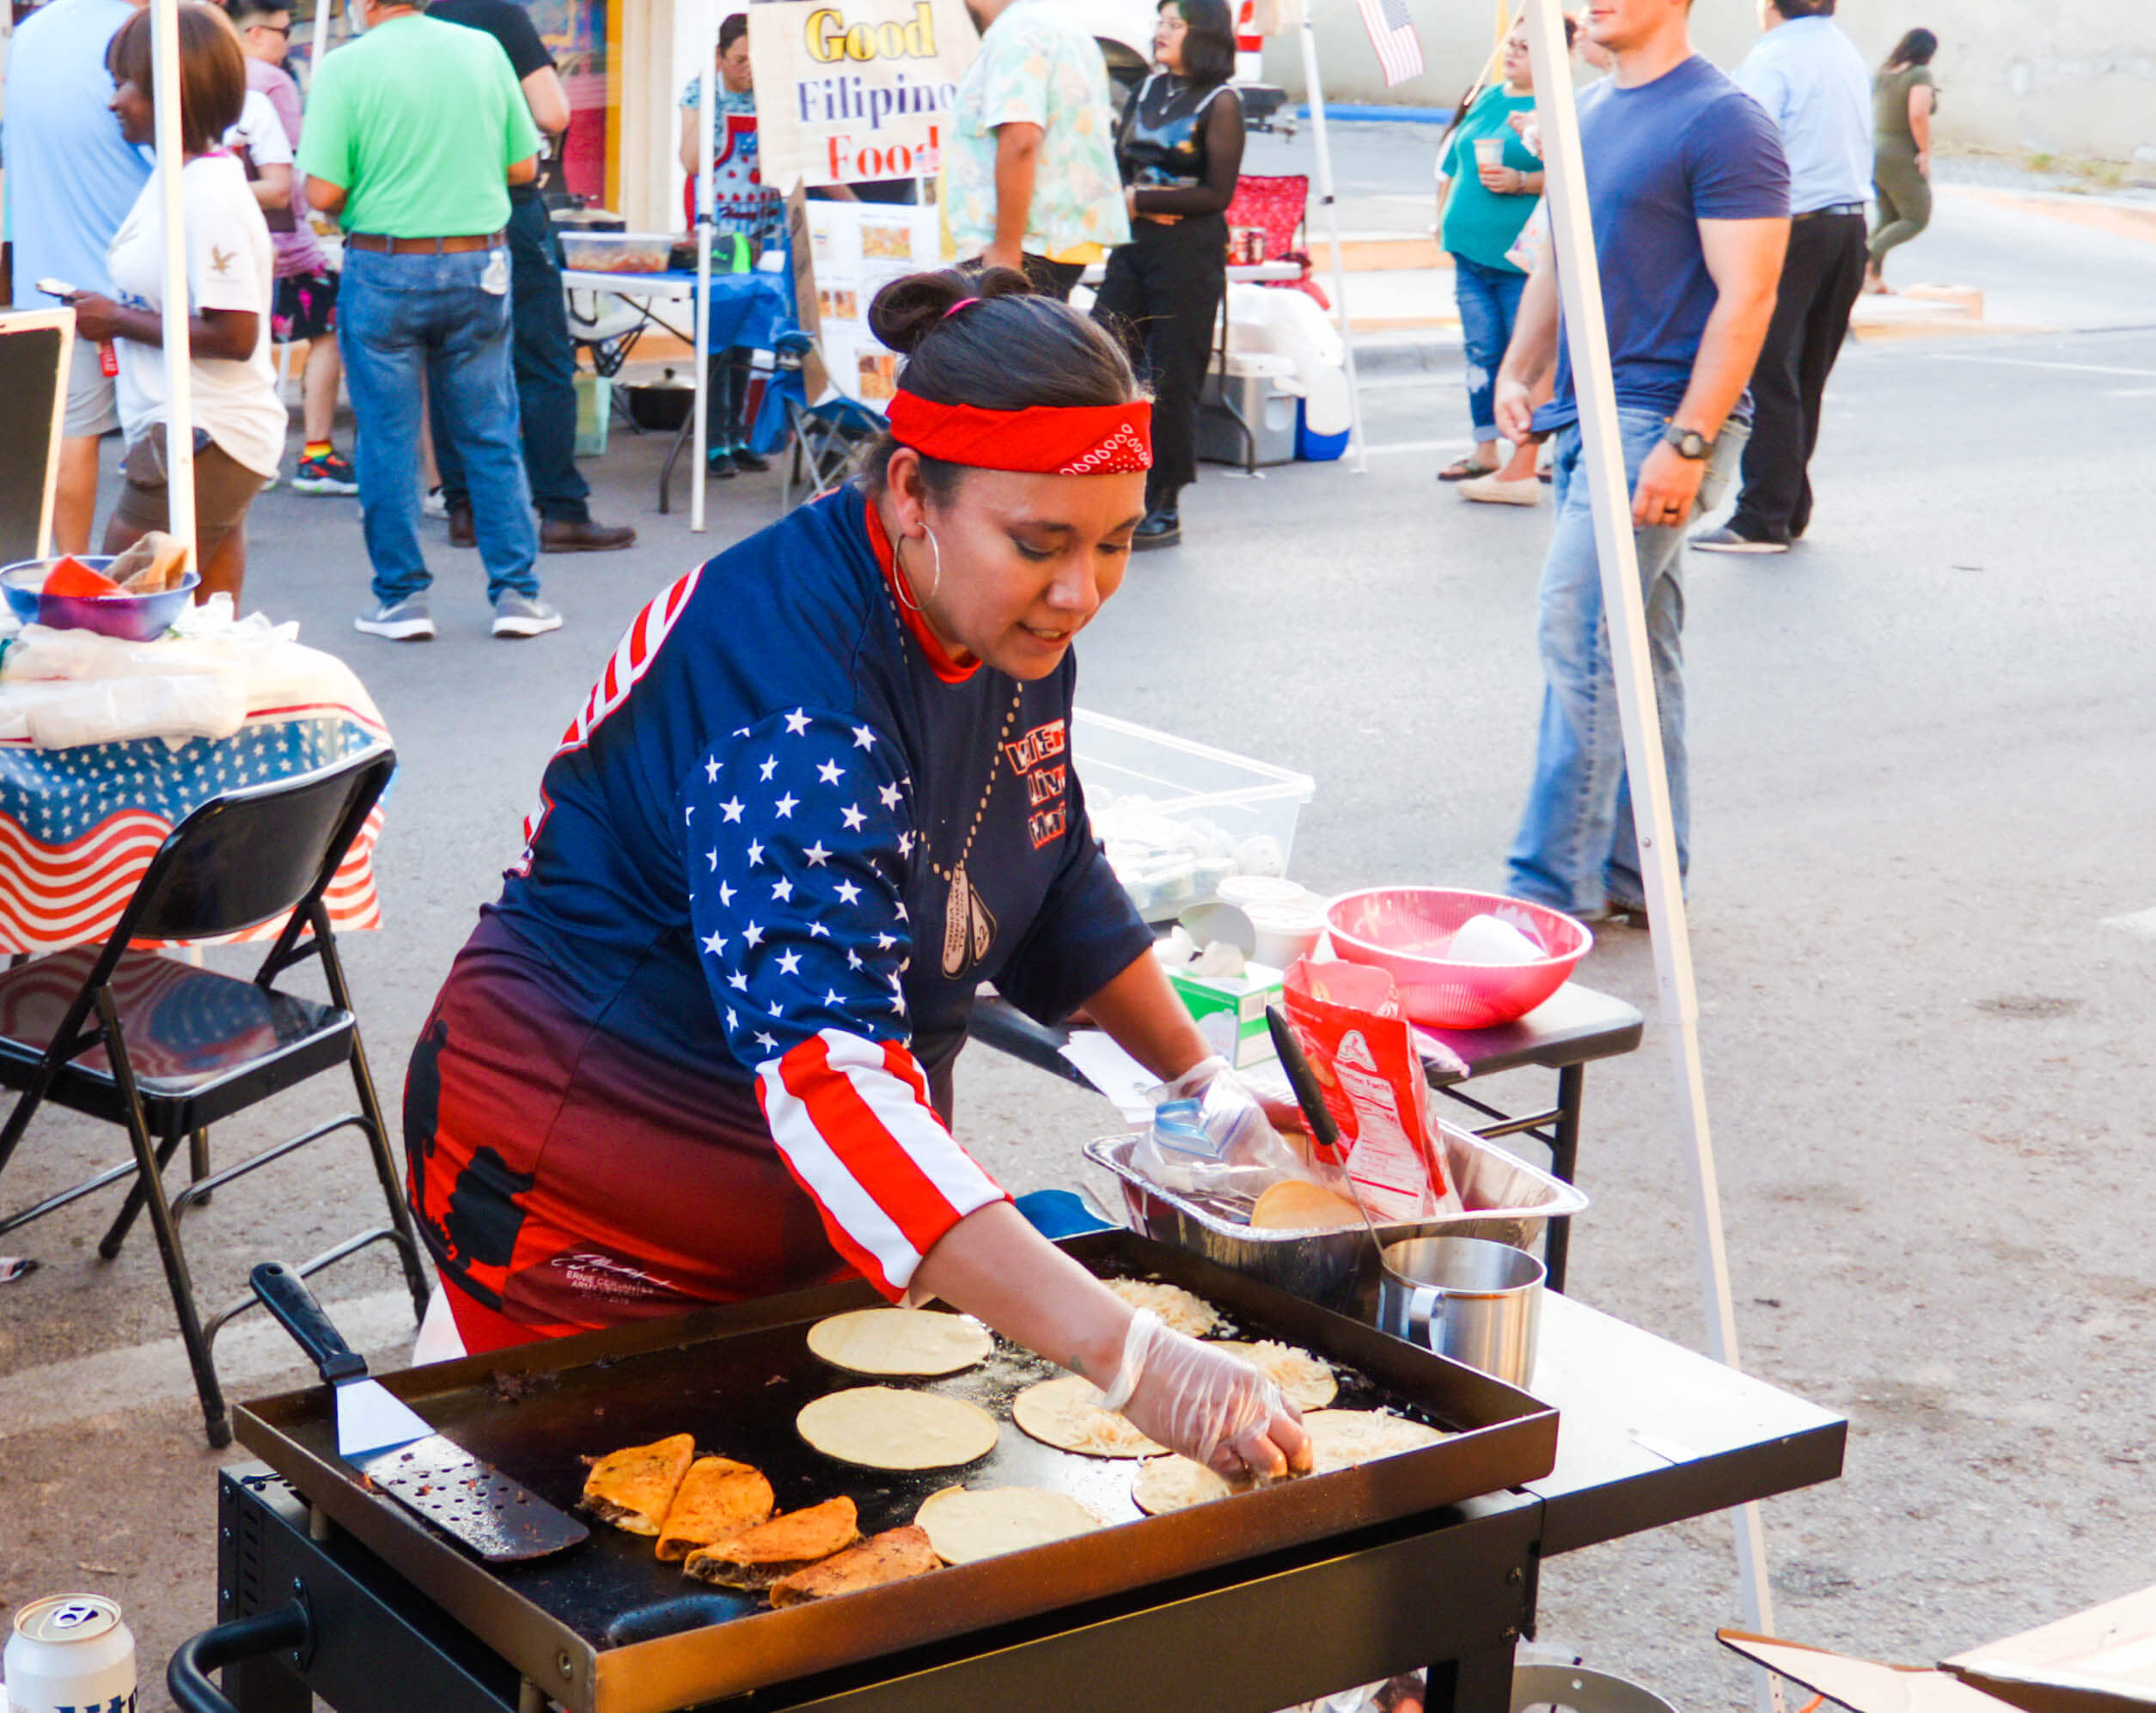 Woman Cooking at 4th of July Celebration